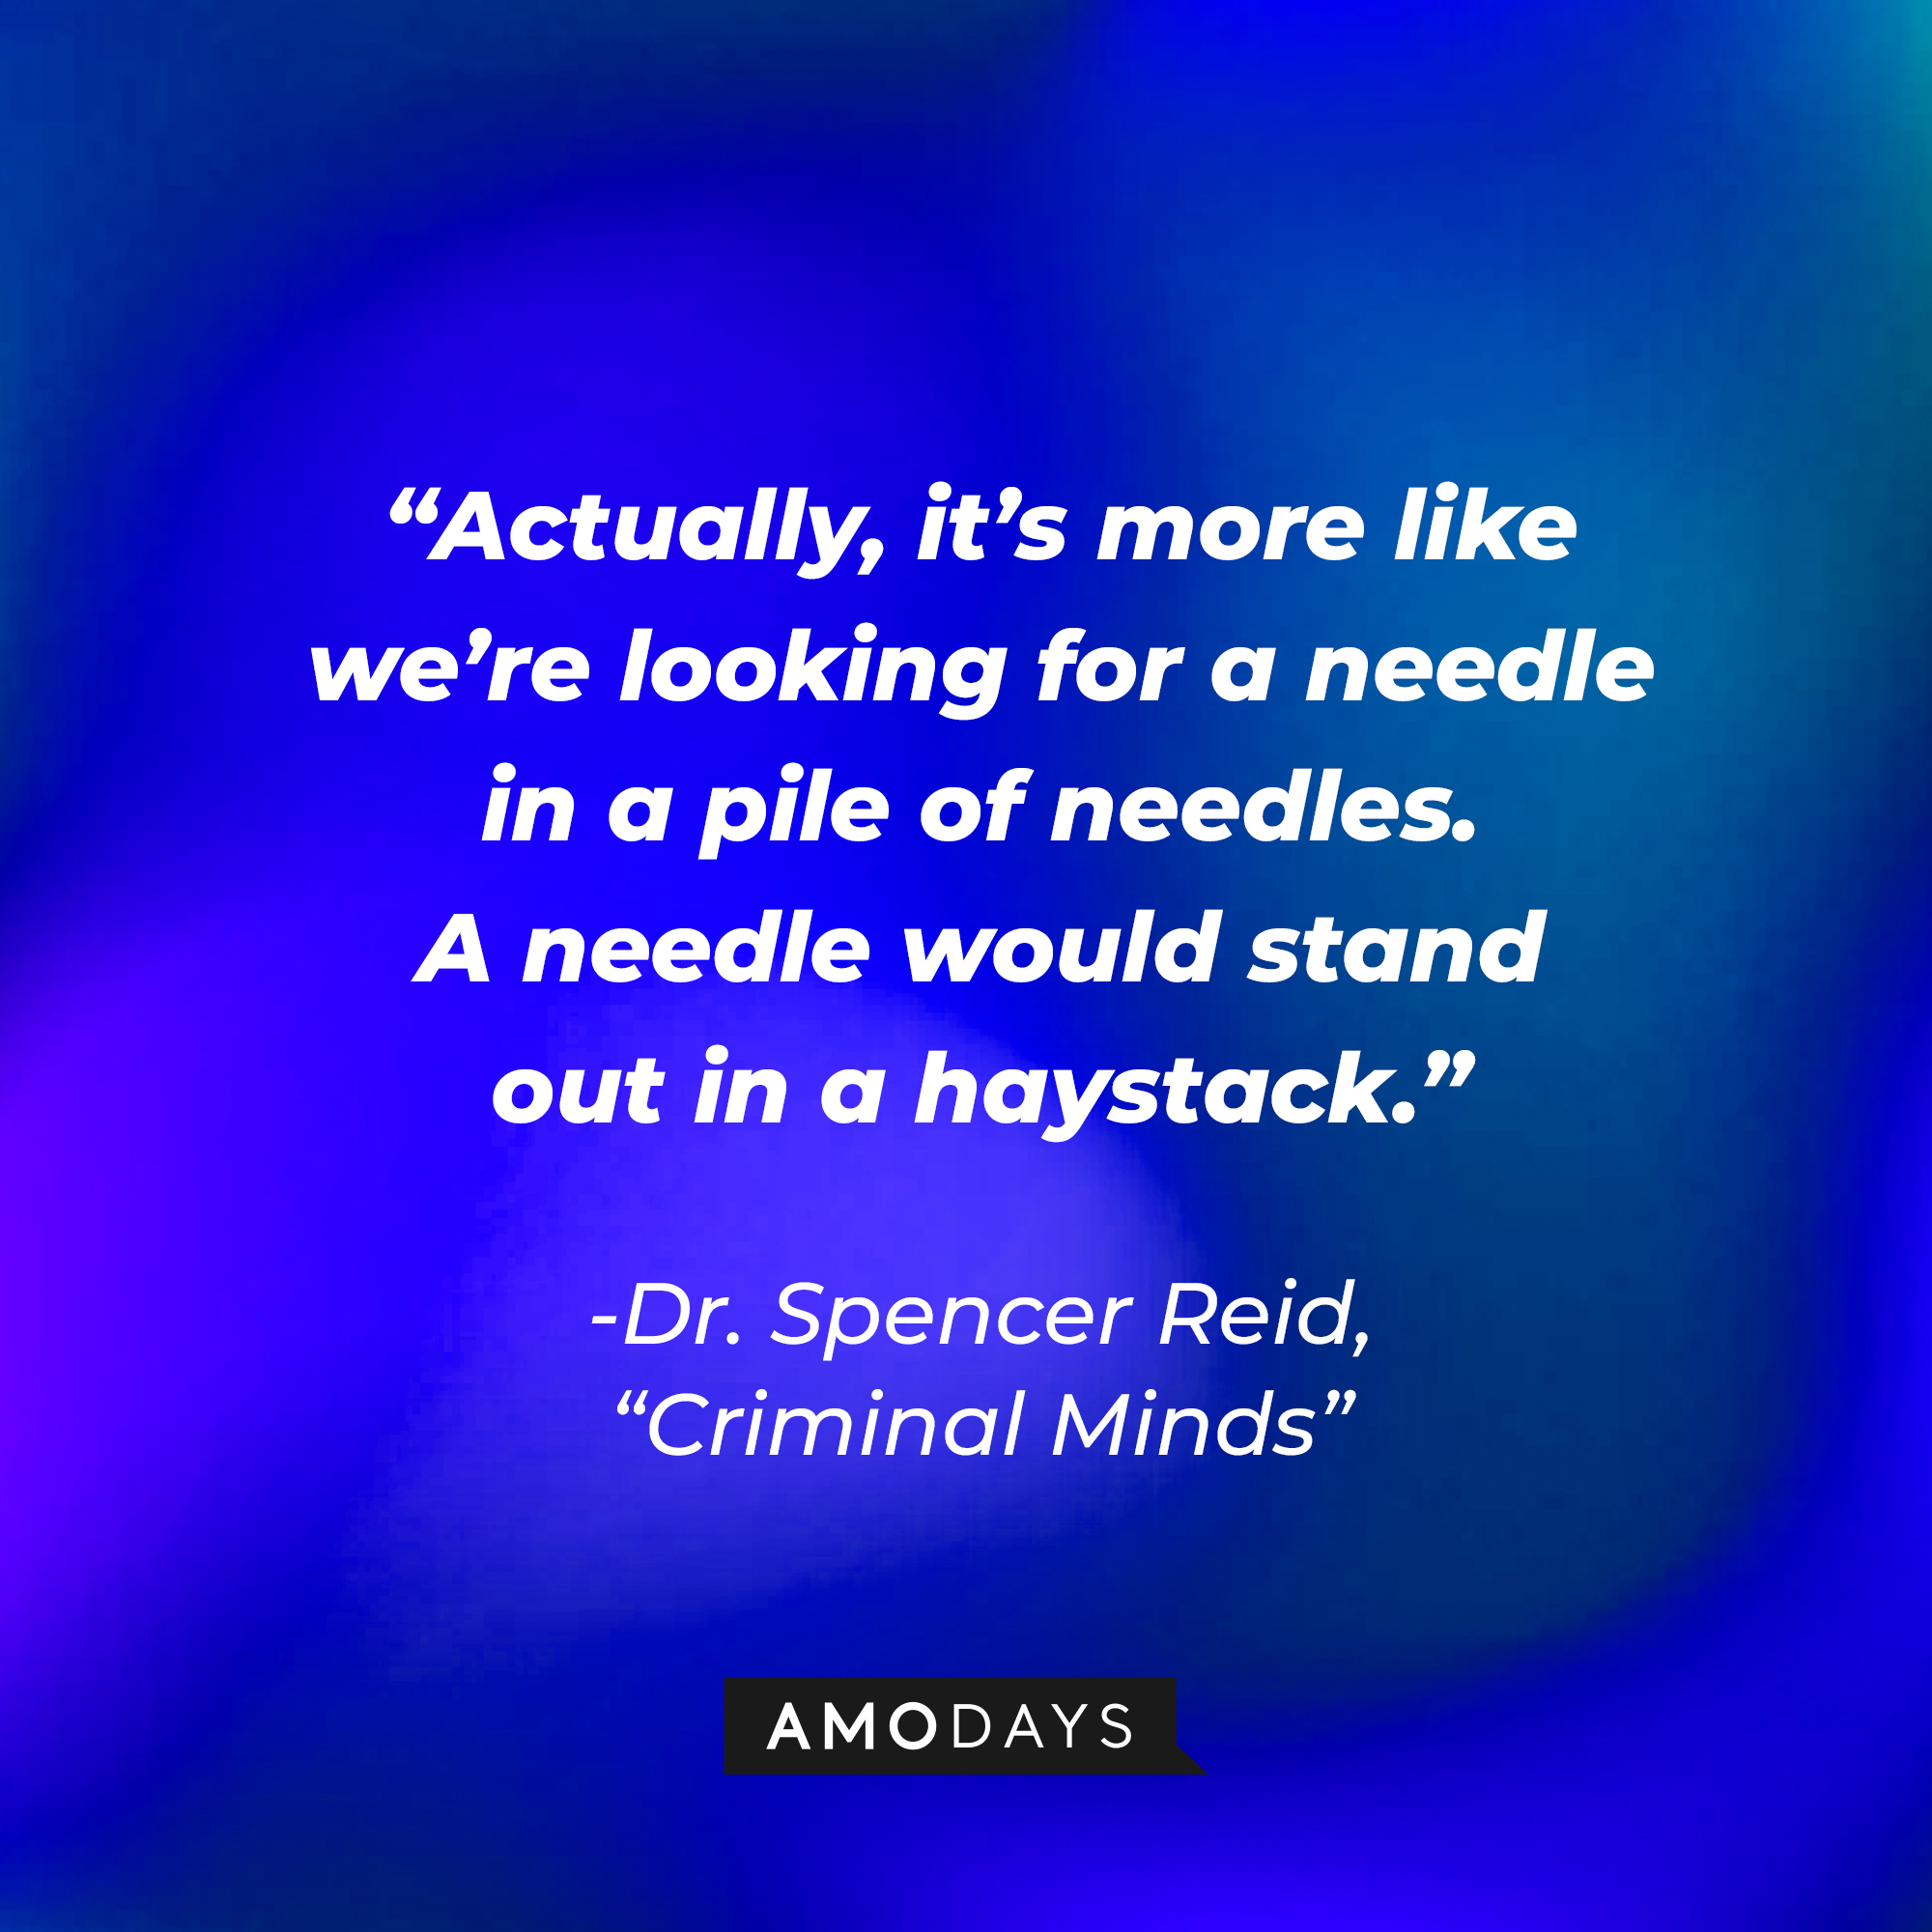 Dr. Spencer Reid's quote: “Actually, it’s more like we’re looking for a needle in a pile of needles. A needle would stand out in a haystack.” | Source: Amodays